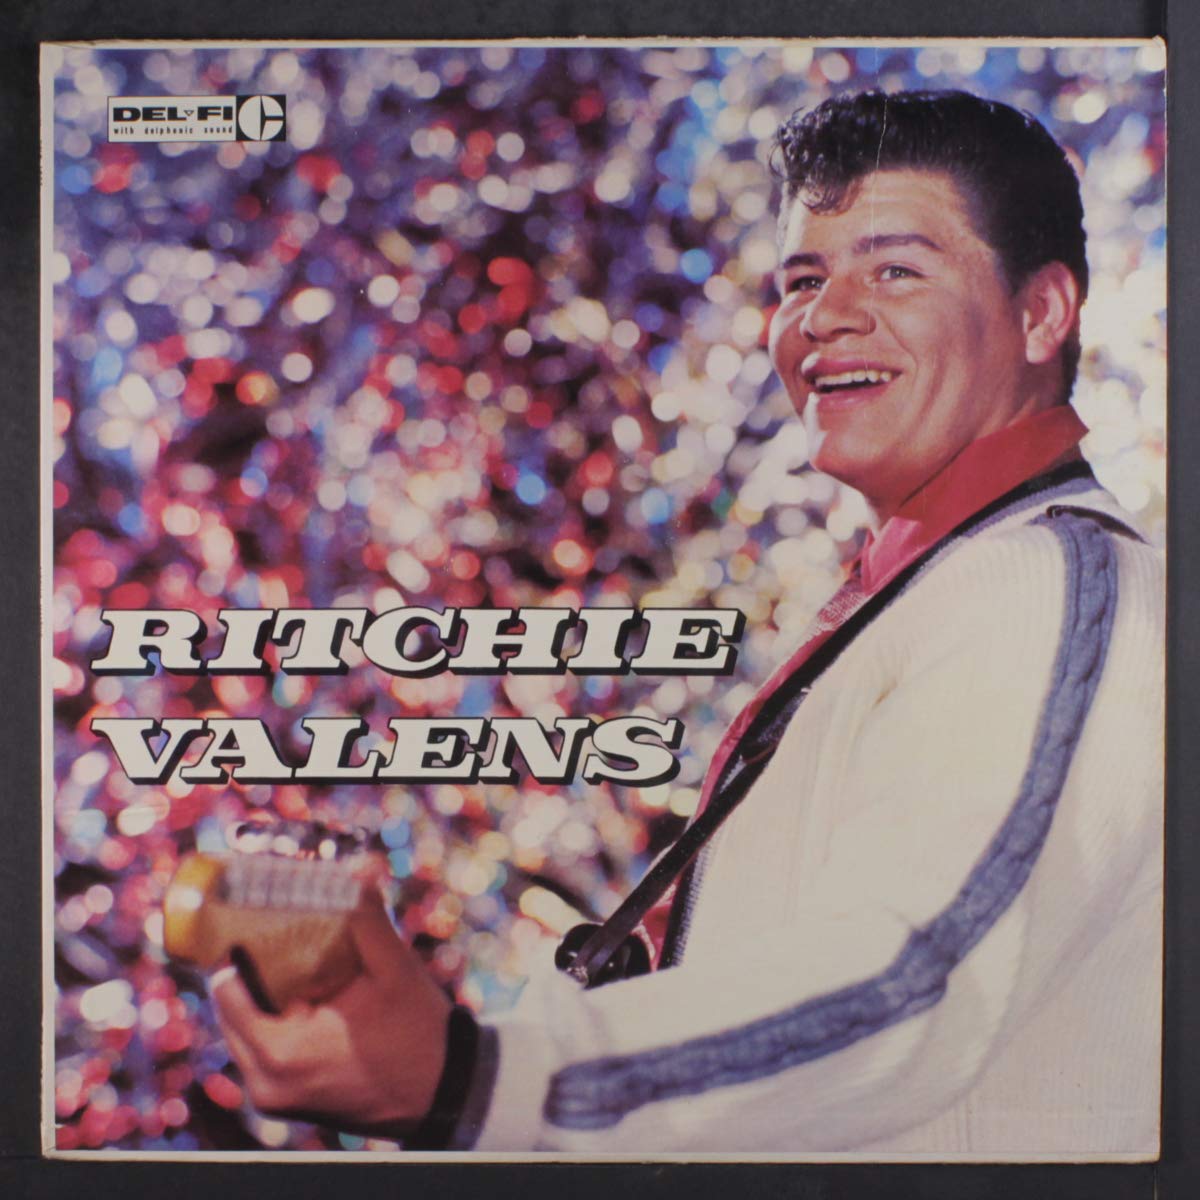 La Bamba by Ritchie Valens: Great B-Sides